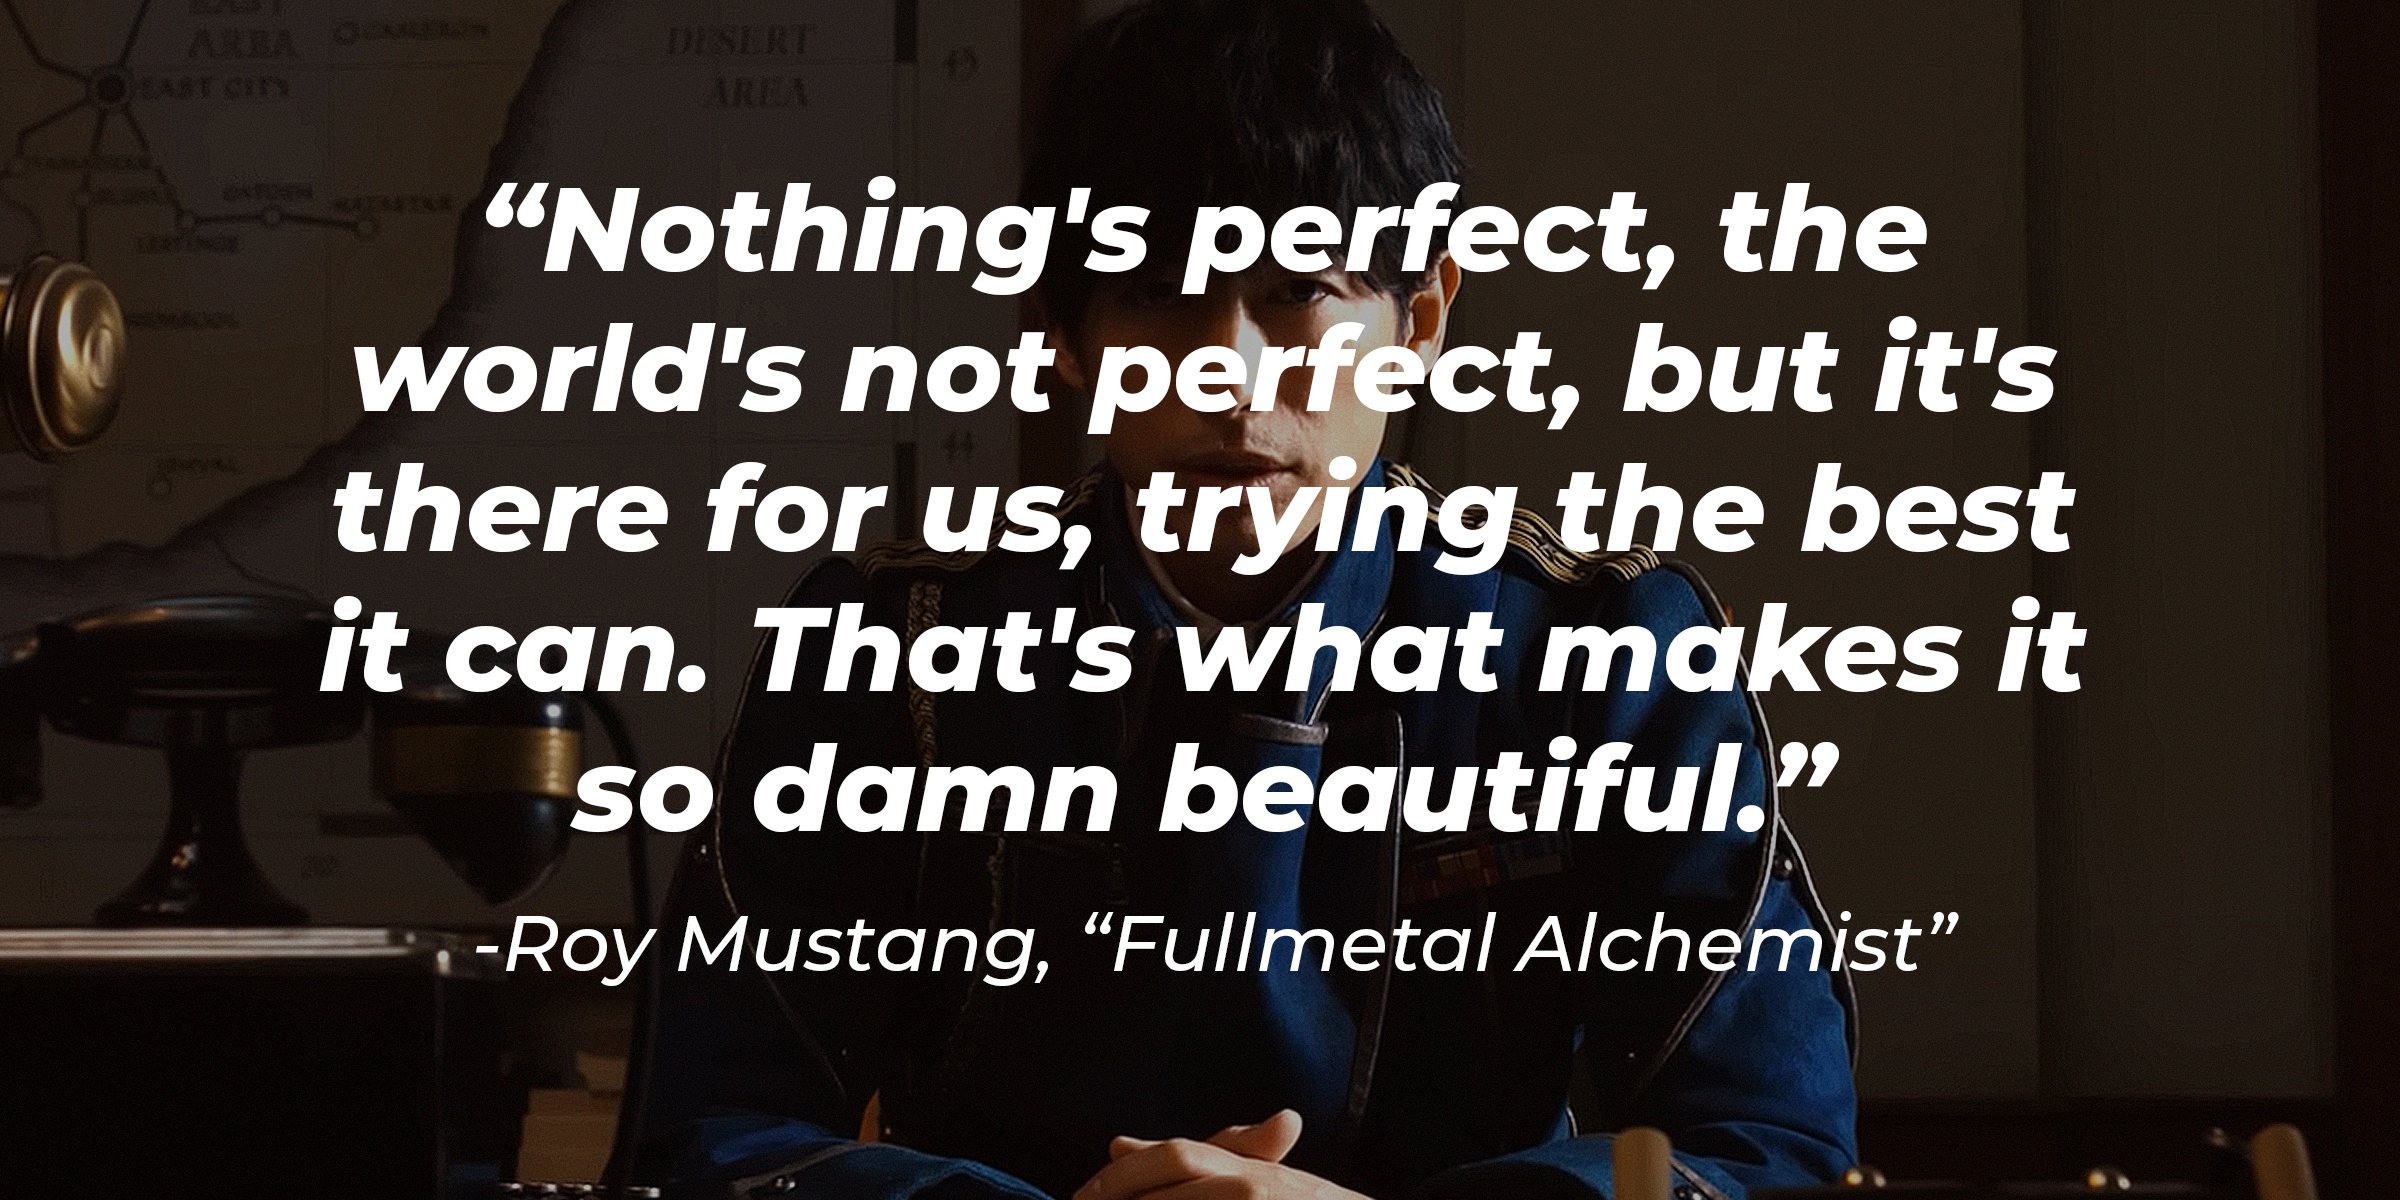 Roy Mustang's quote: "Nothing's perfect, the world's not perfect, but it's there for us, trying the best it can. That's what makes it so damn beautiful." | Source: youtube.com/NetflixAsia